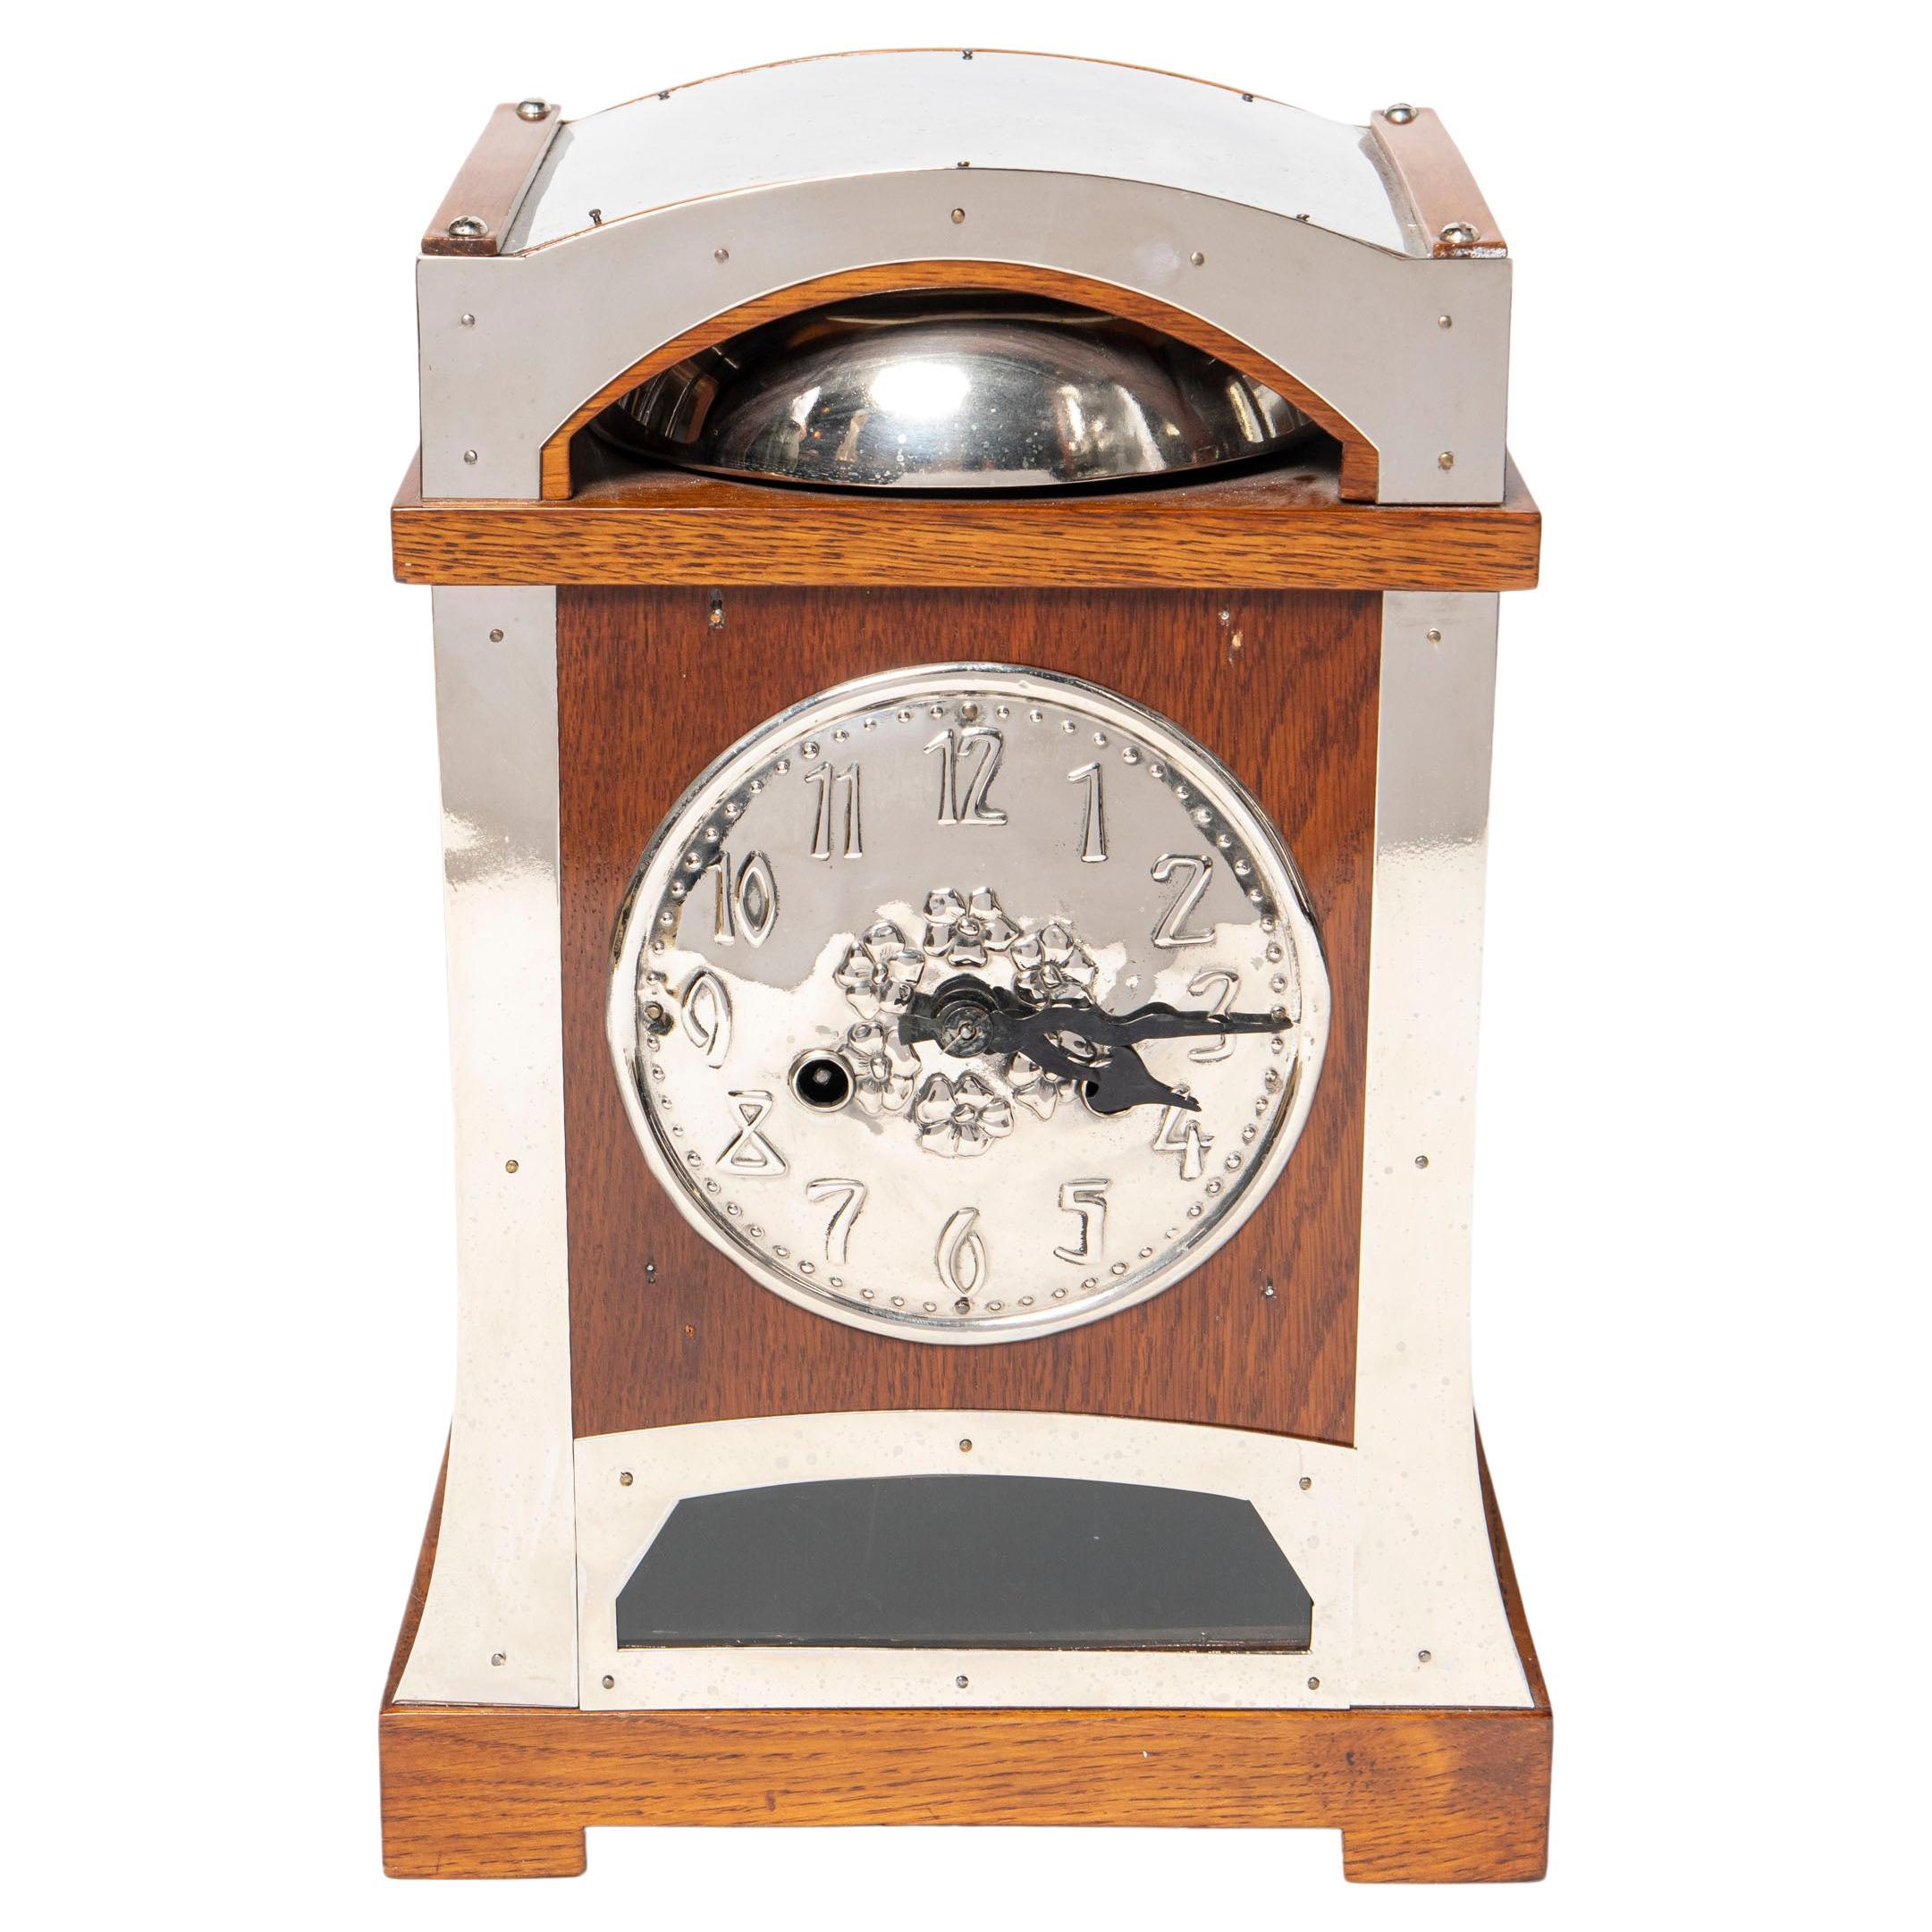 Wood and Chrome Table Clock, Art Nouveau Period, Spain, Early 20th Century For Sale